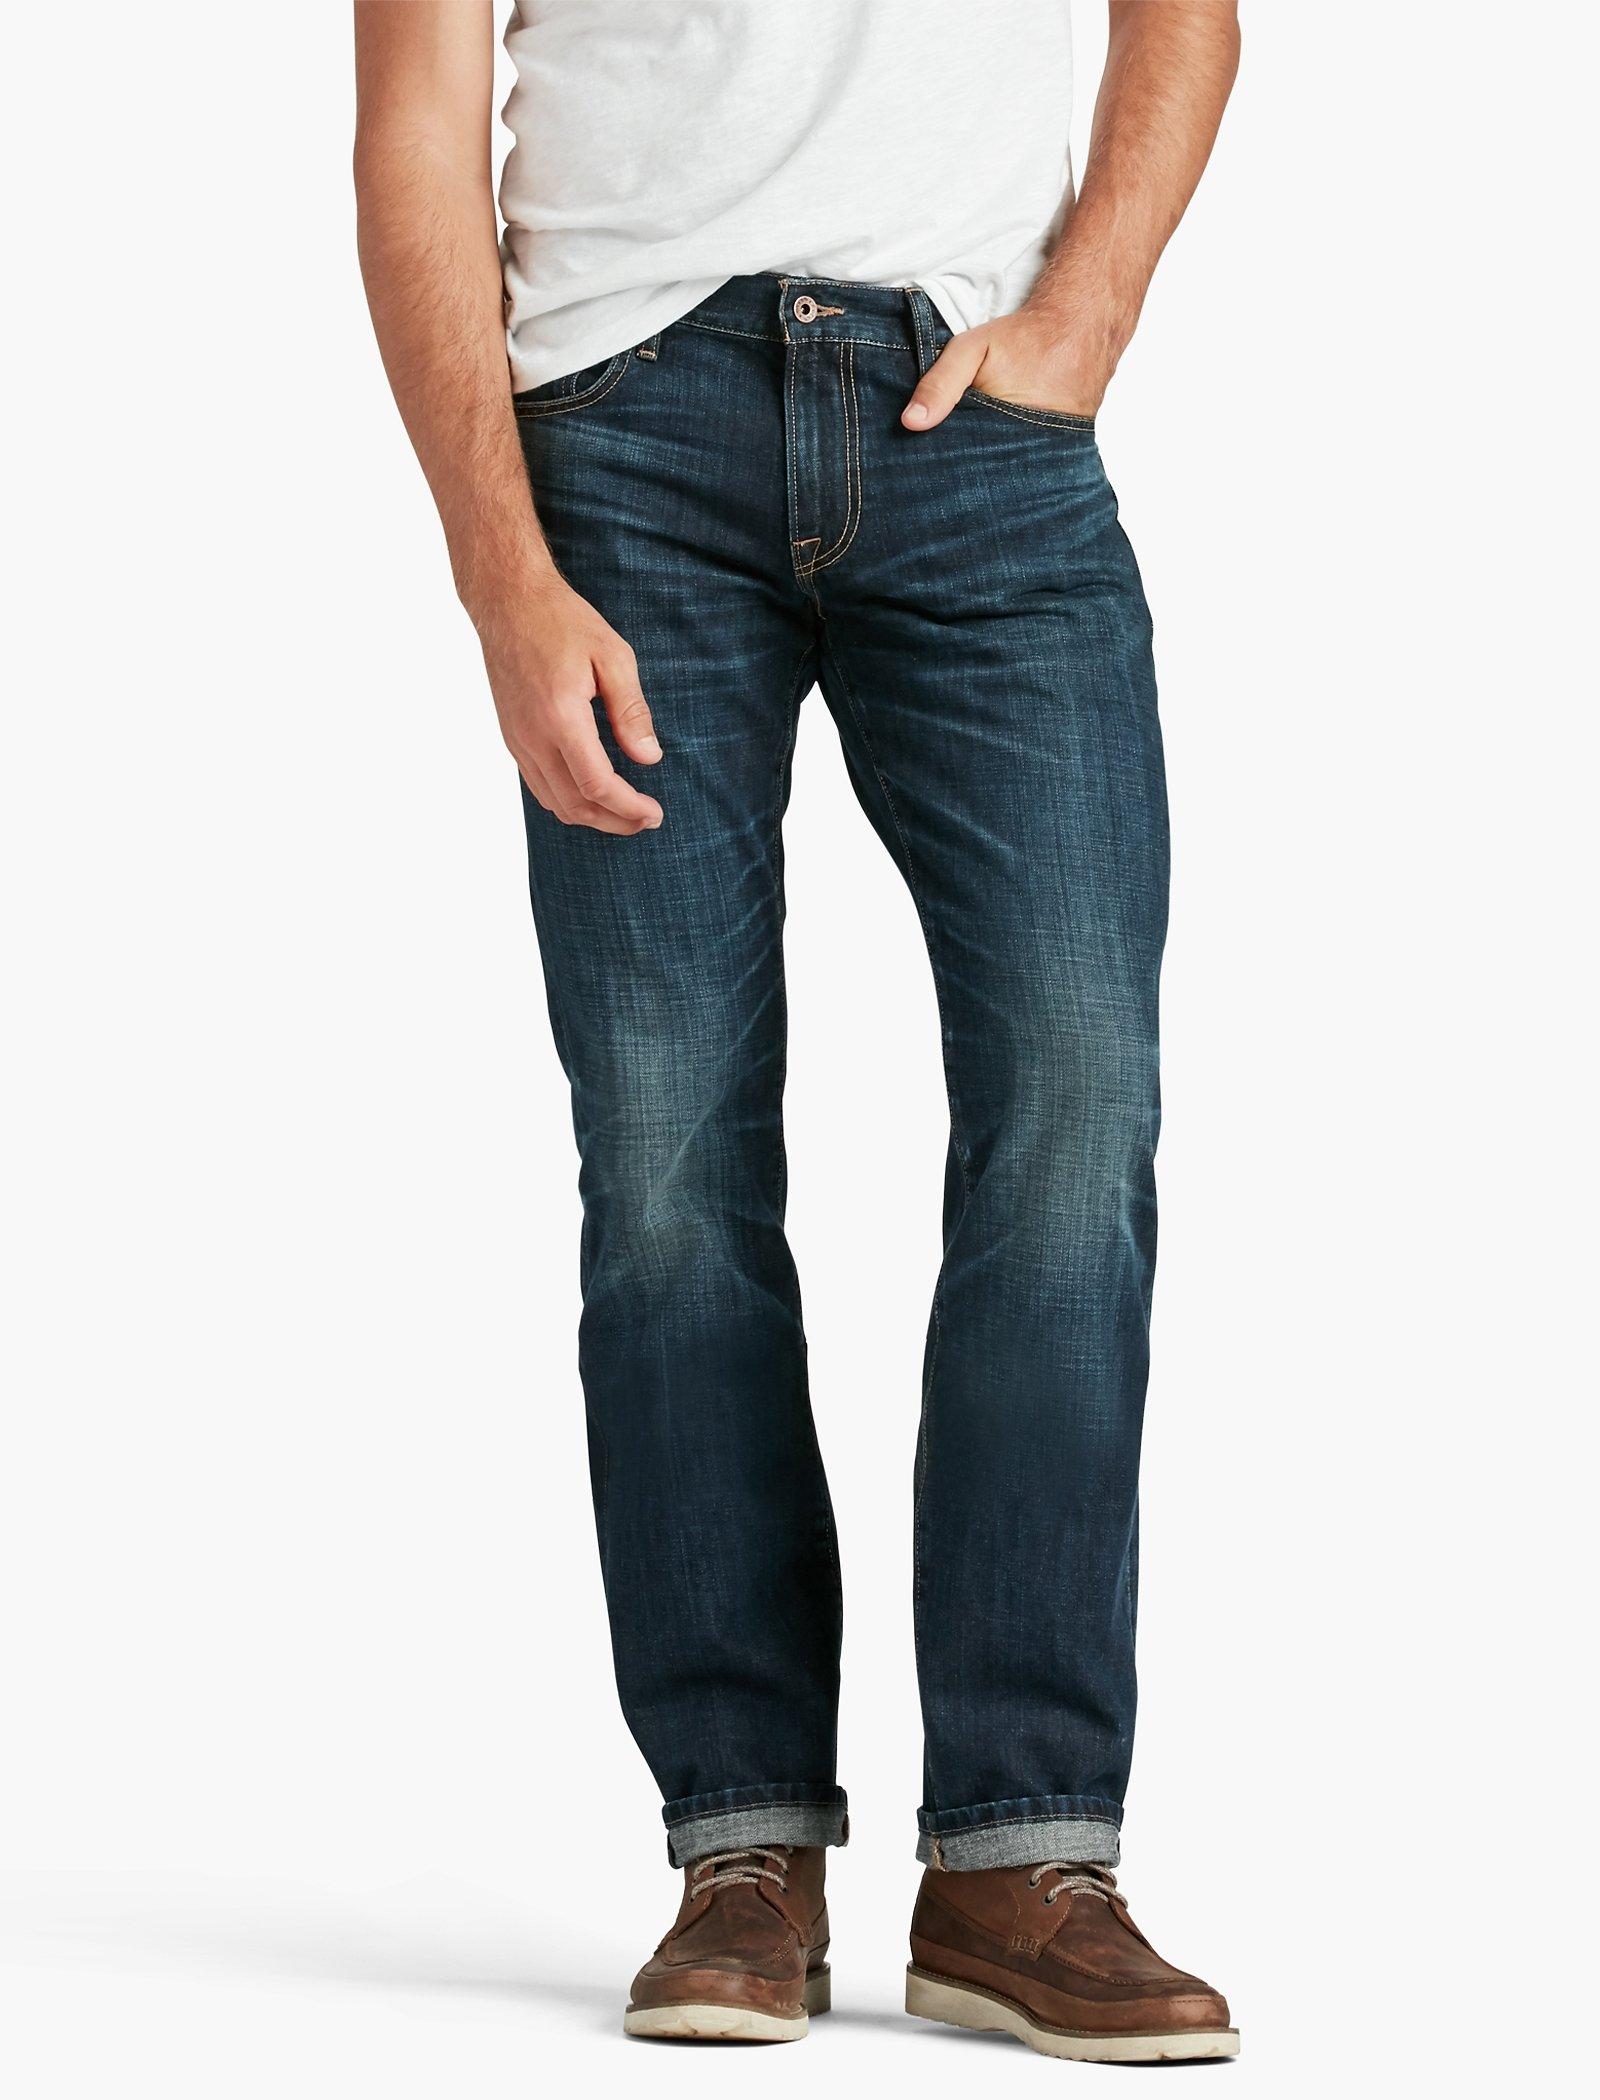 7 of all mankind mens jeans